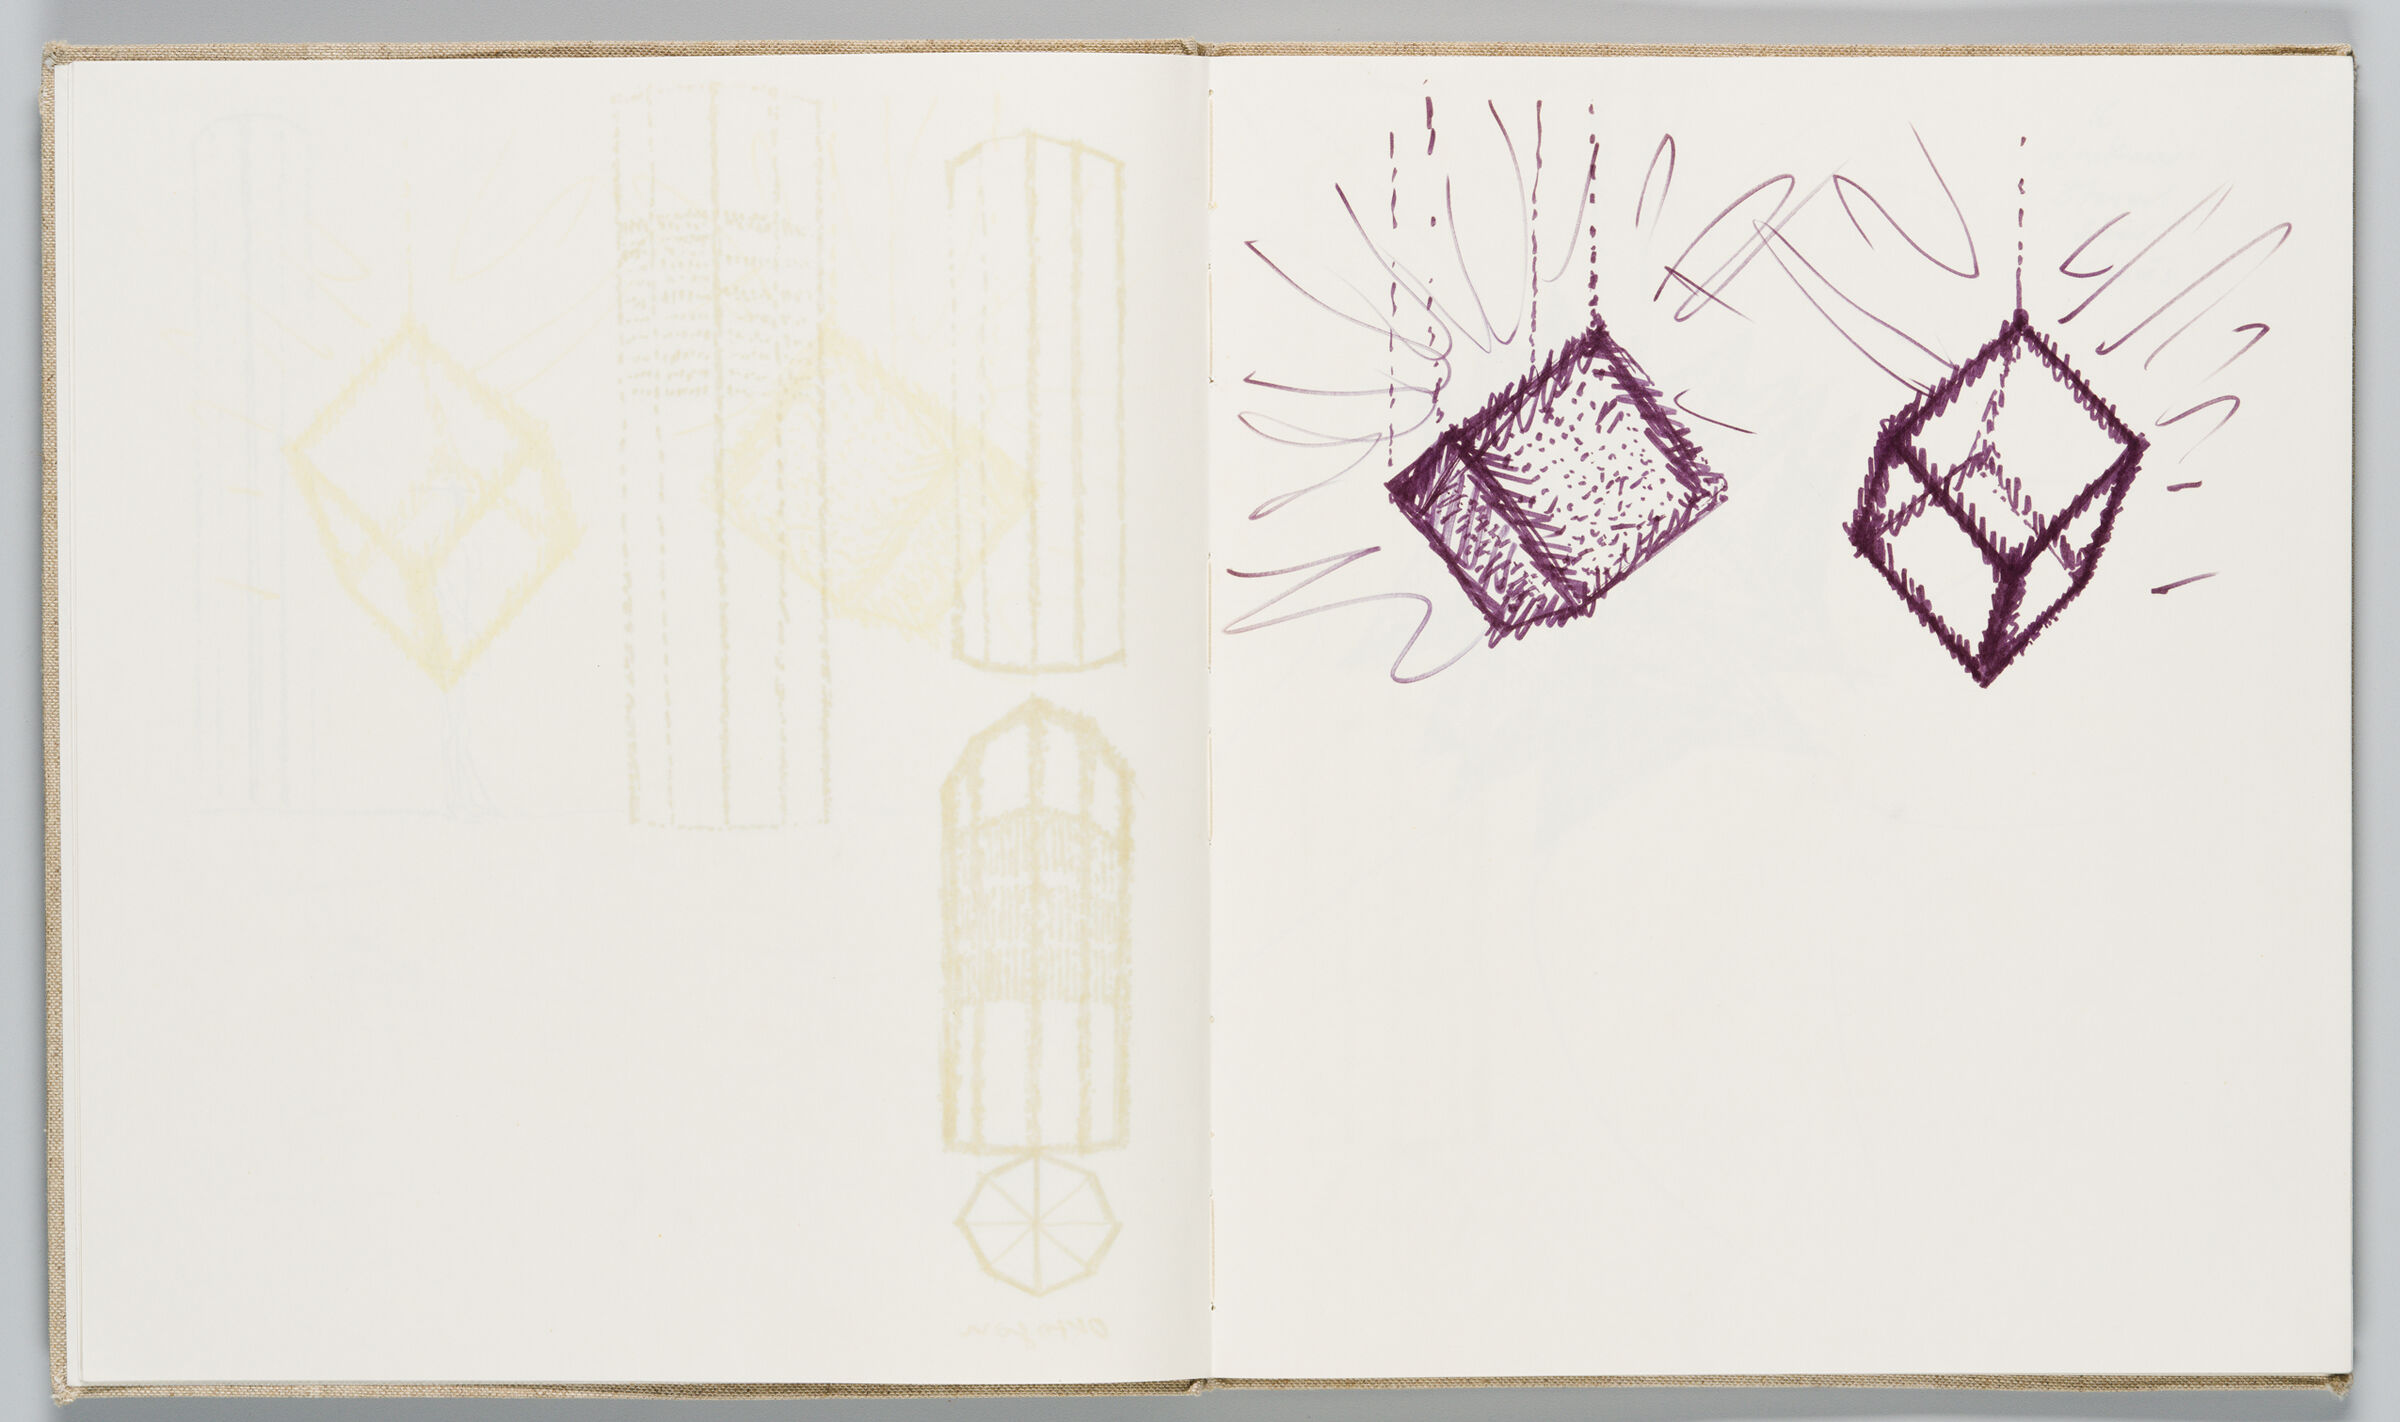 Untitled (Bleed-Through Of Previous Page With Color Transfer, Left Page); Untitled (Light Sculptures, Right Page)